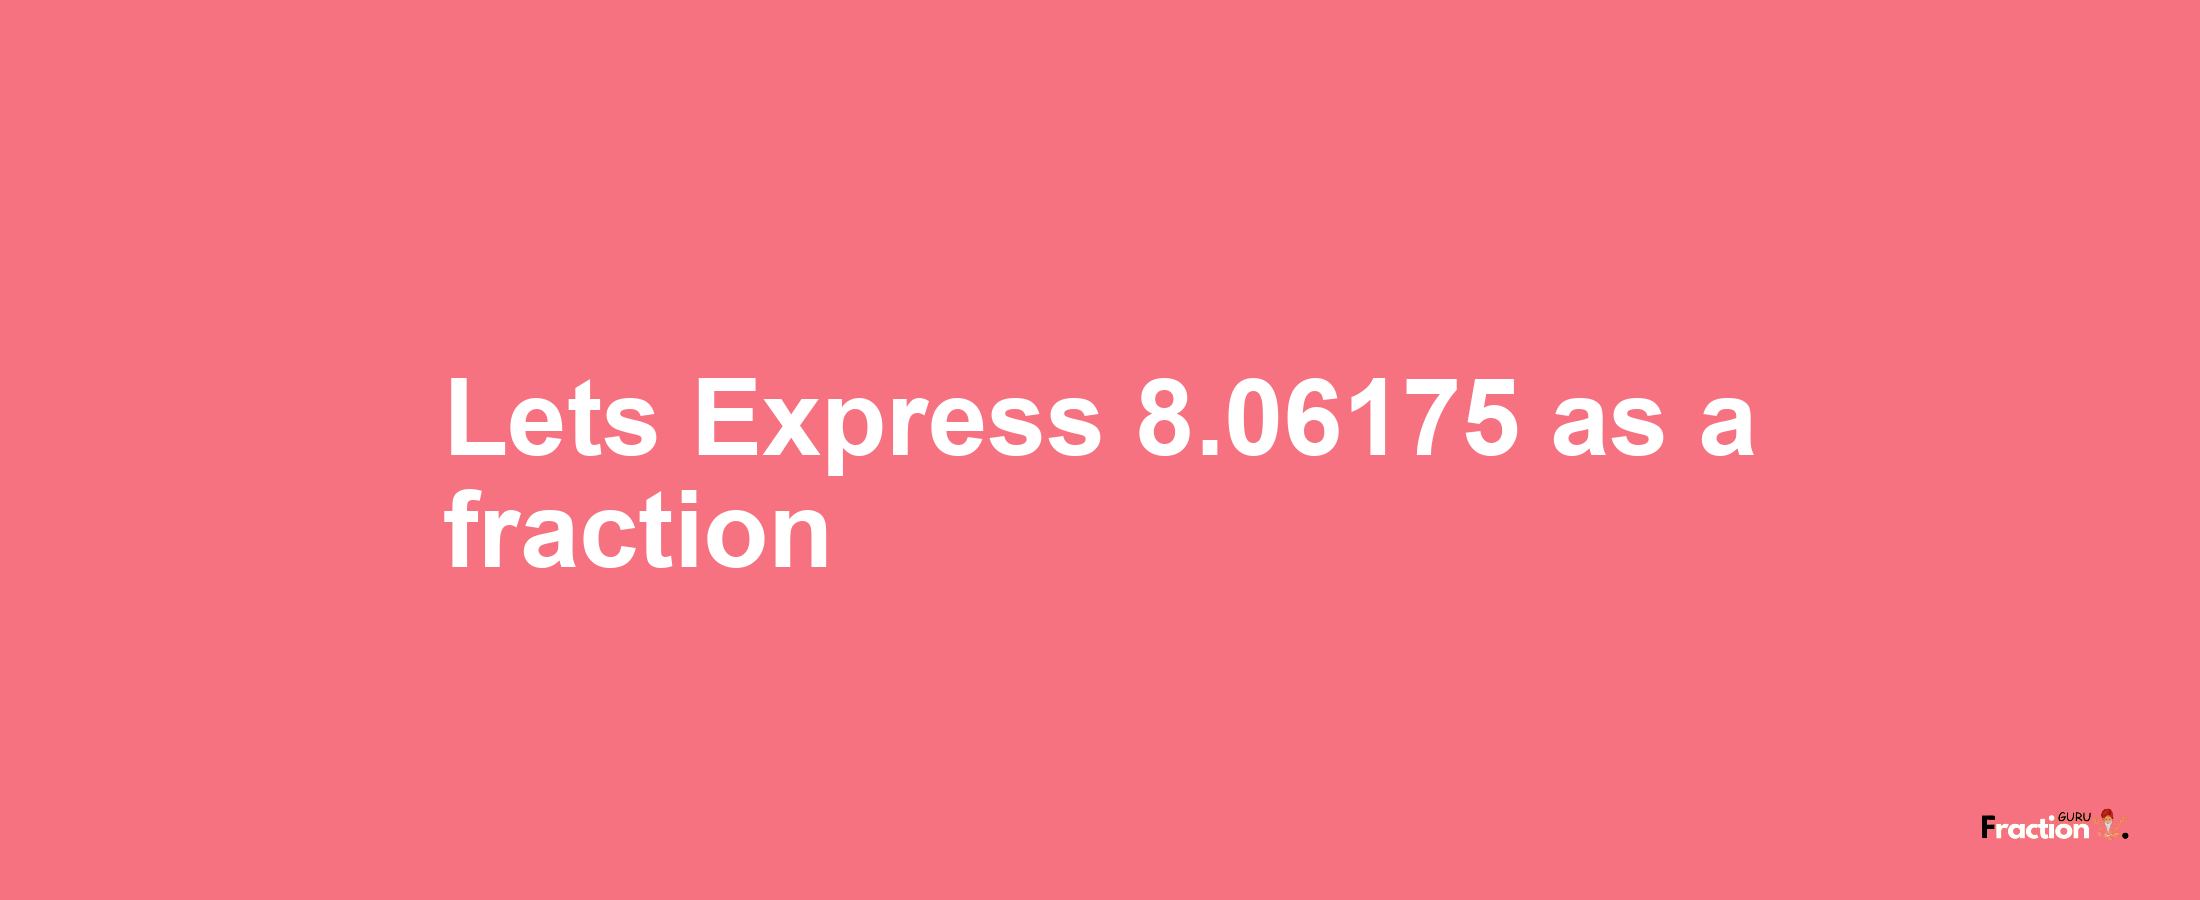 Lets Express 8.06175 as afraction